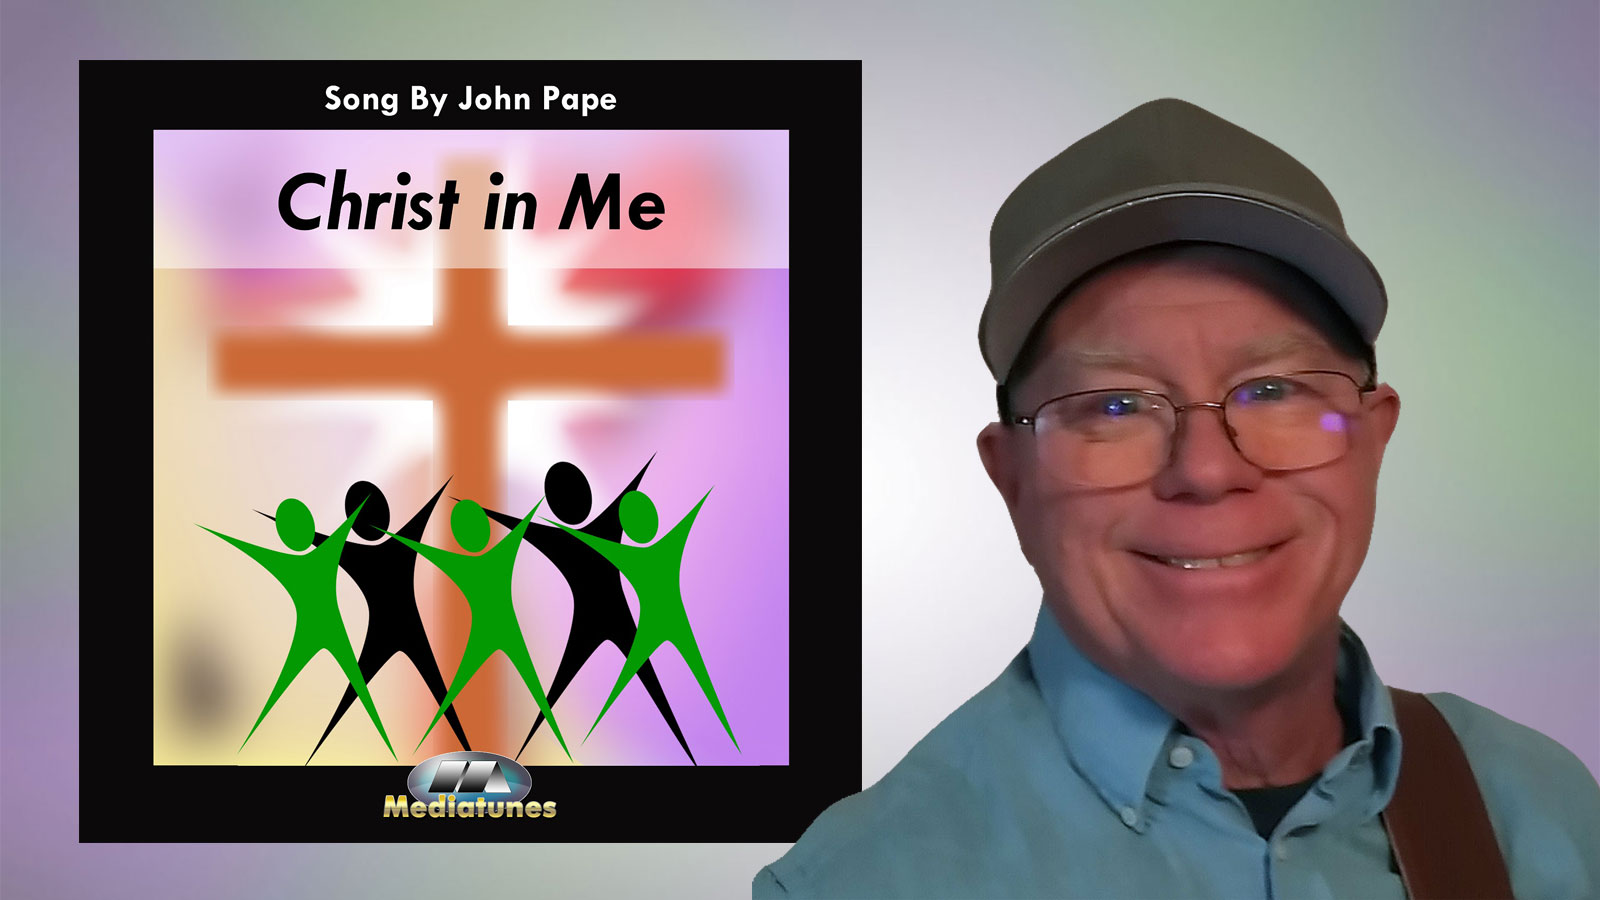 Christ in Me Press Release